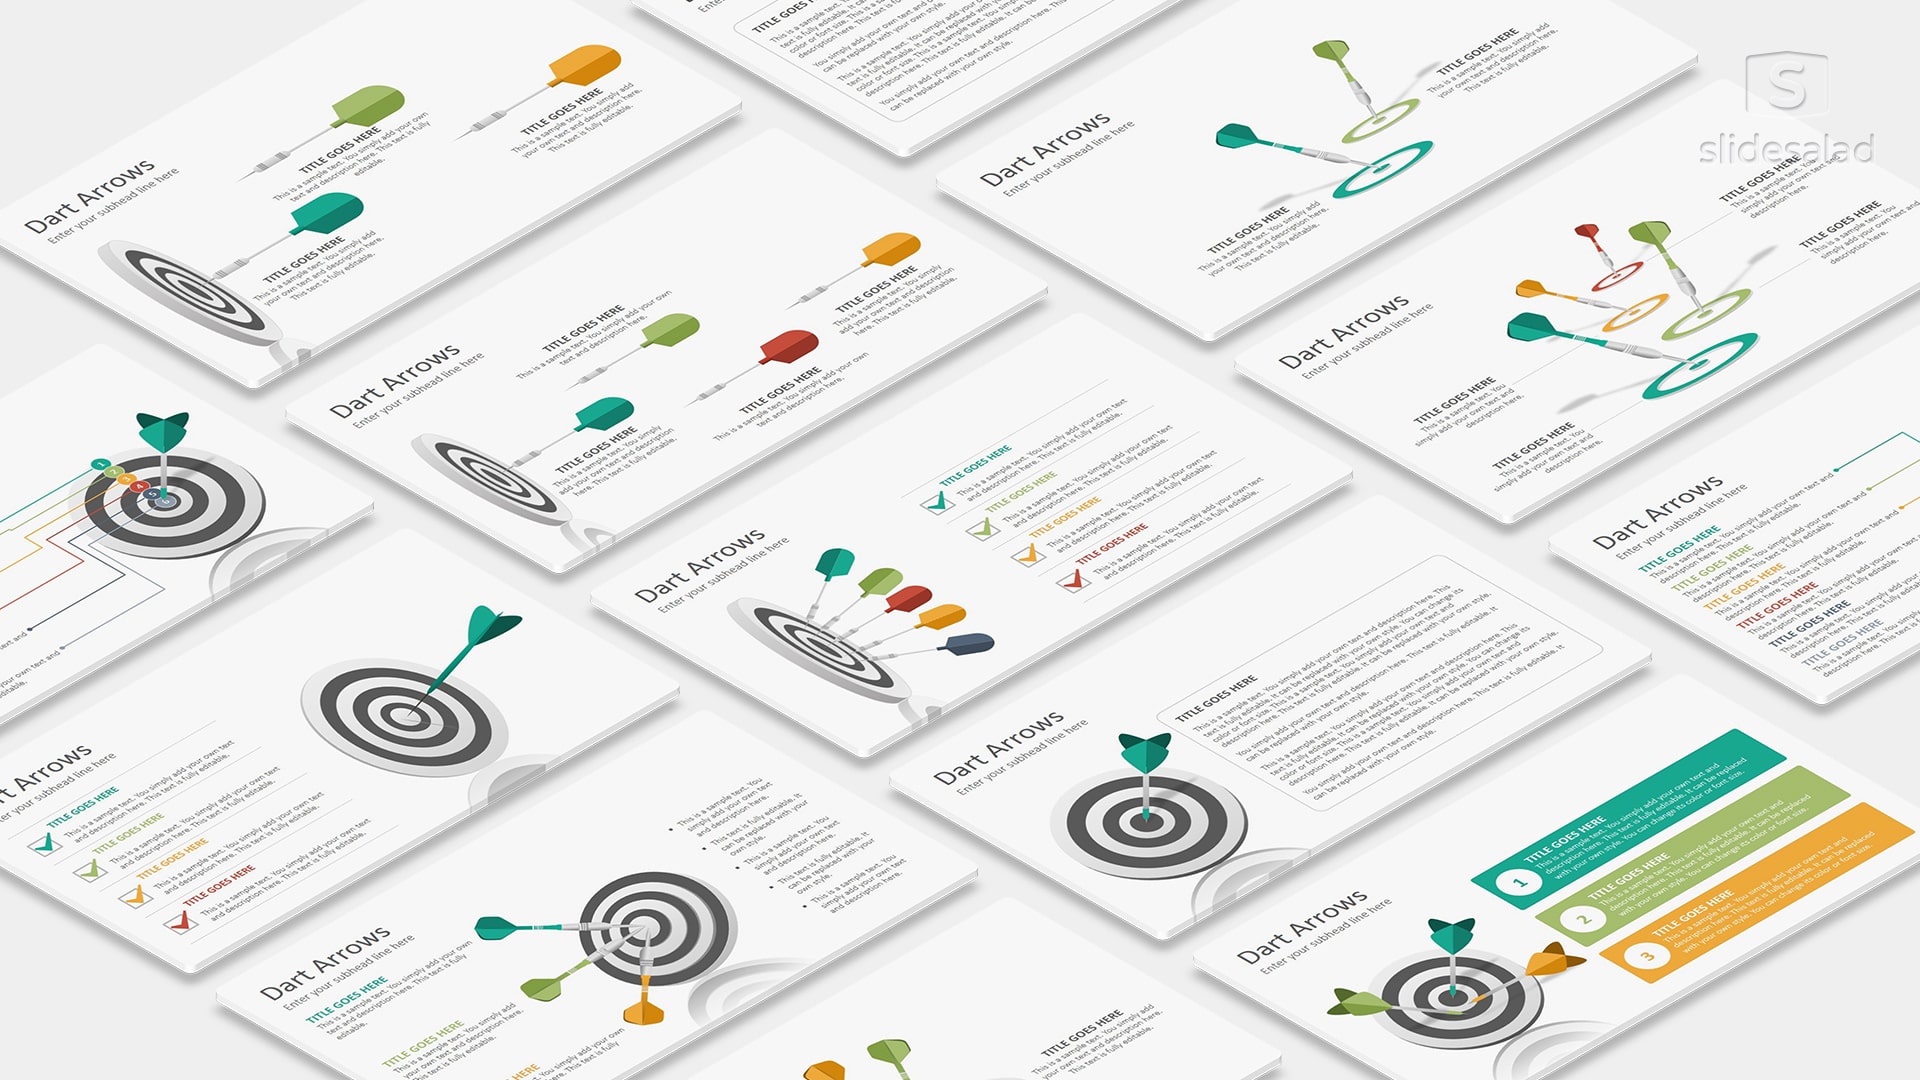 Targets Diagrams PowerPoint Presentation Template - Aim and Focus Based Sales and Marketing PowerPoint Template